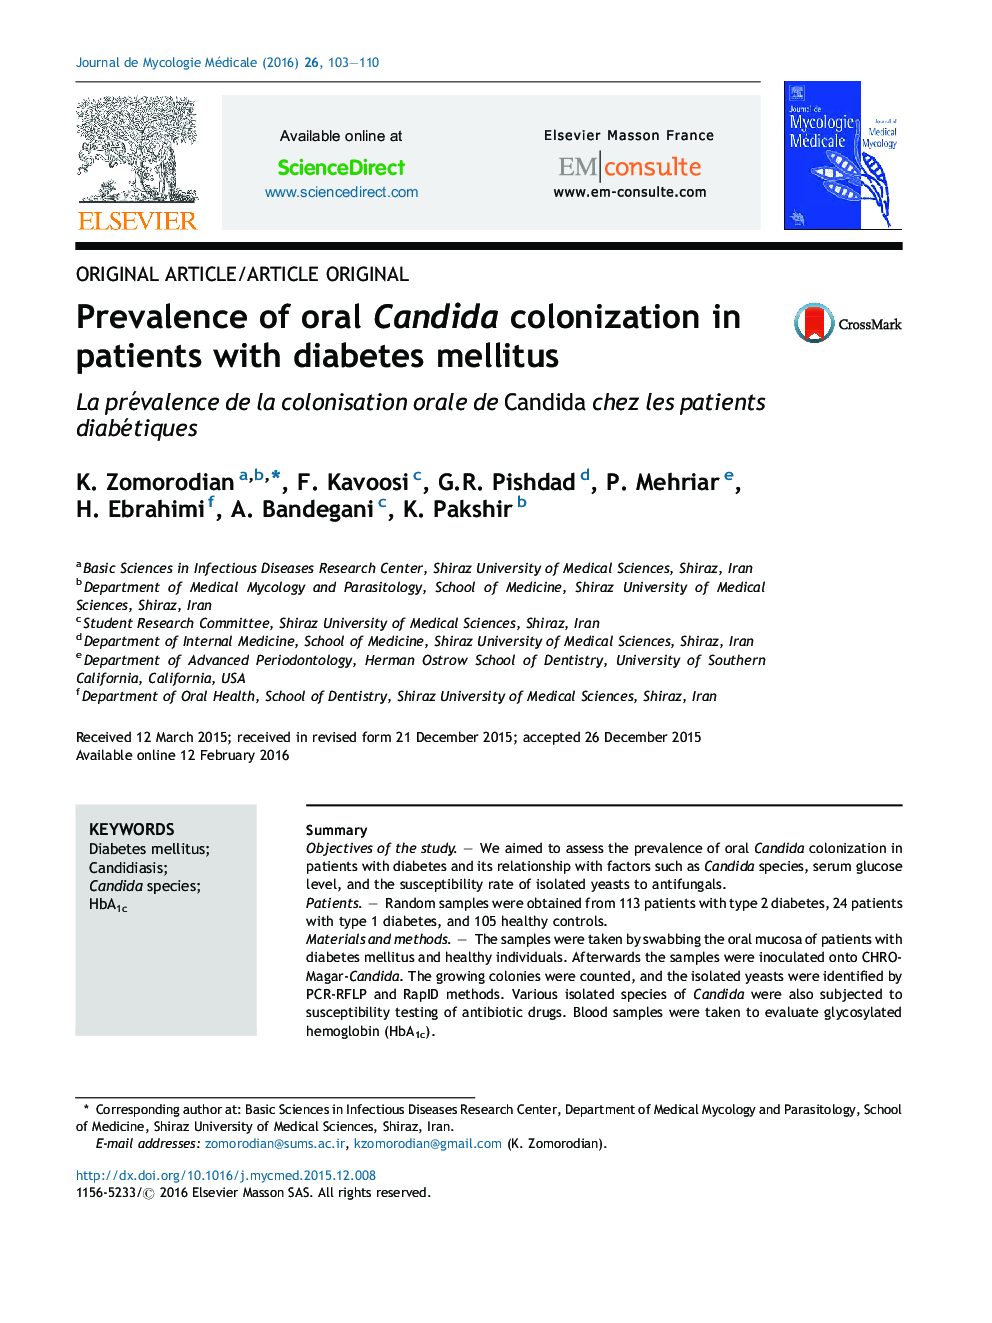 Prevalence of oral Candida colonization in patients with diabetes mellitus